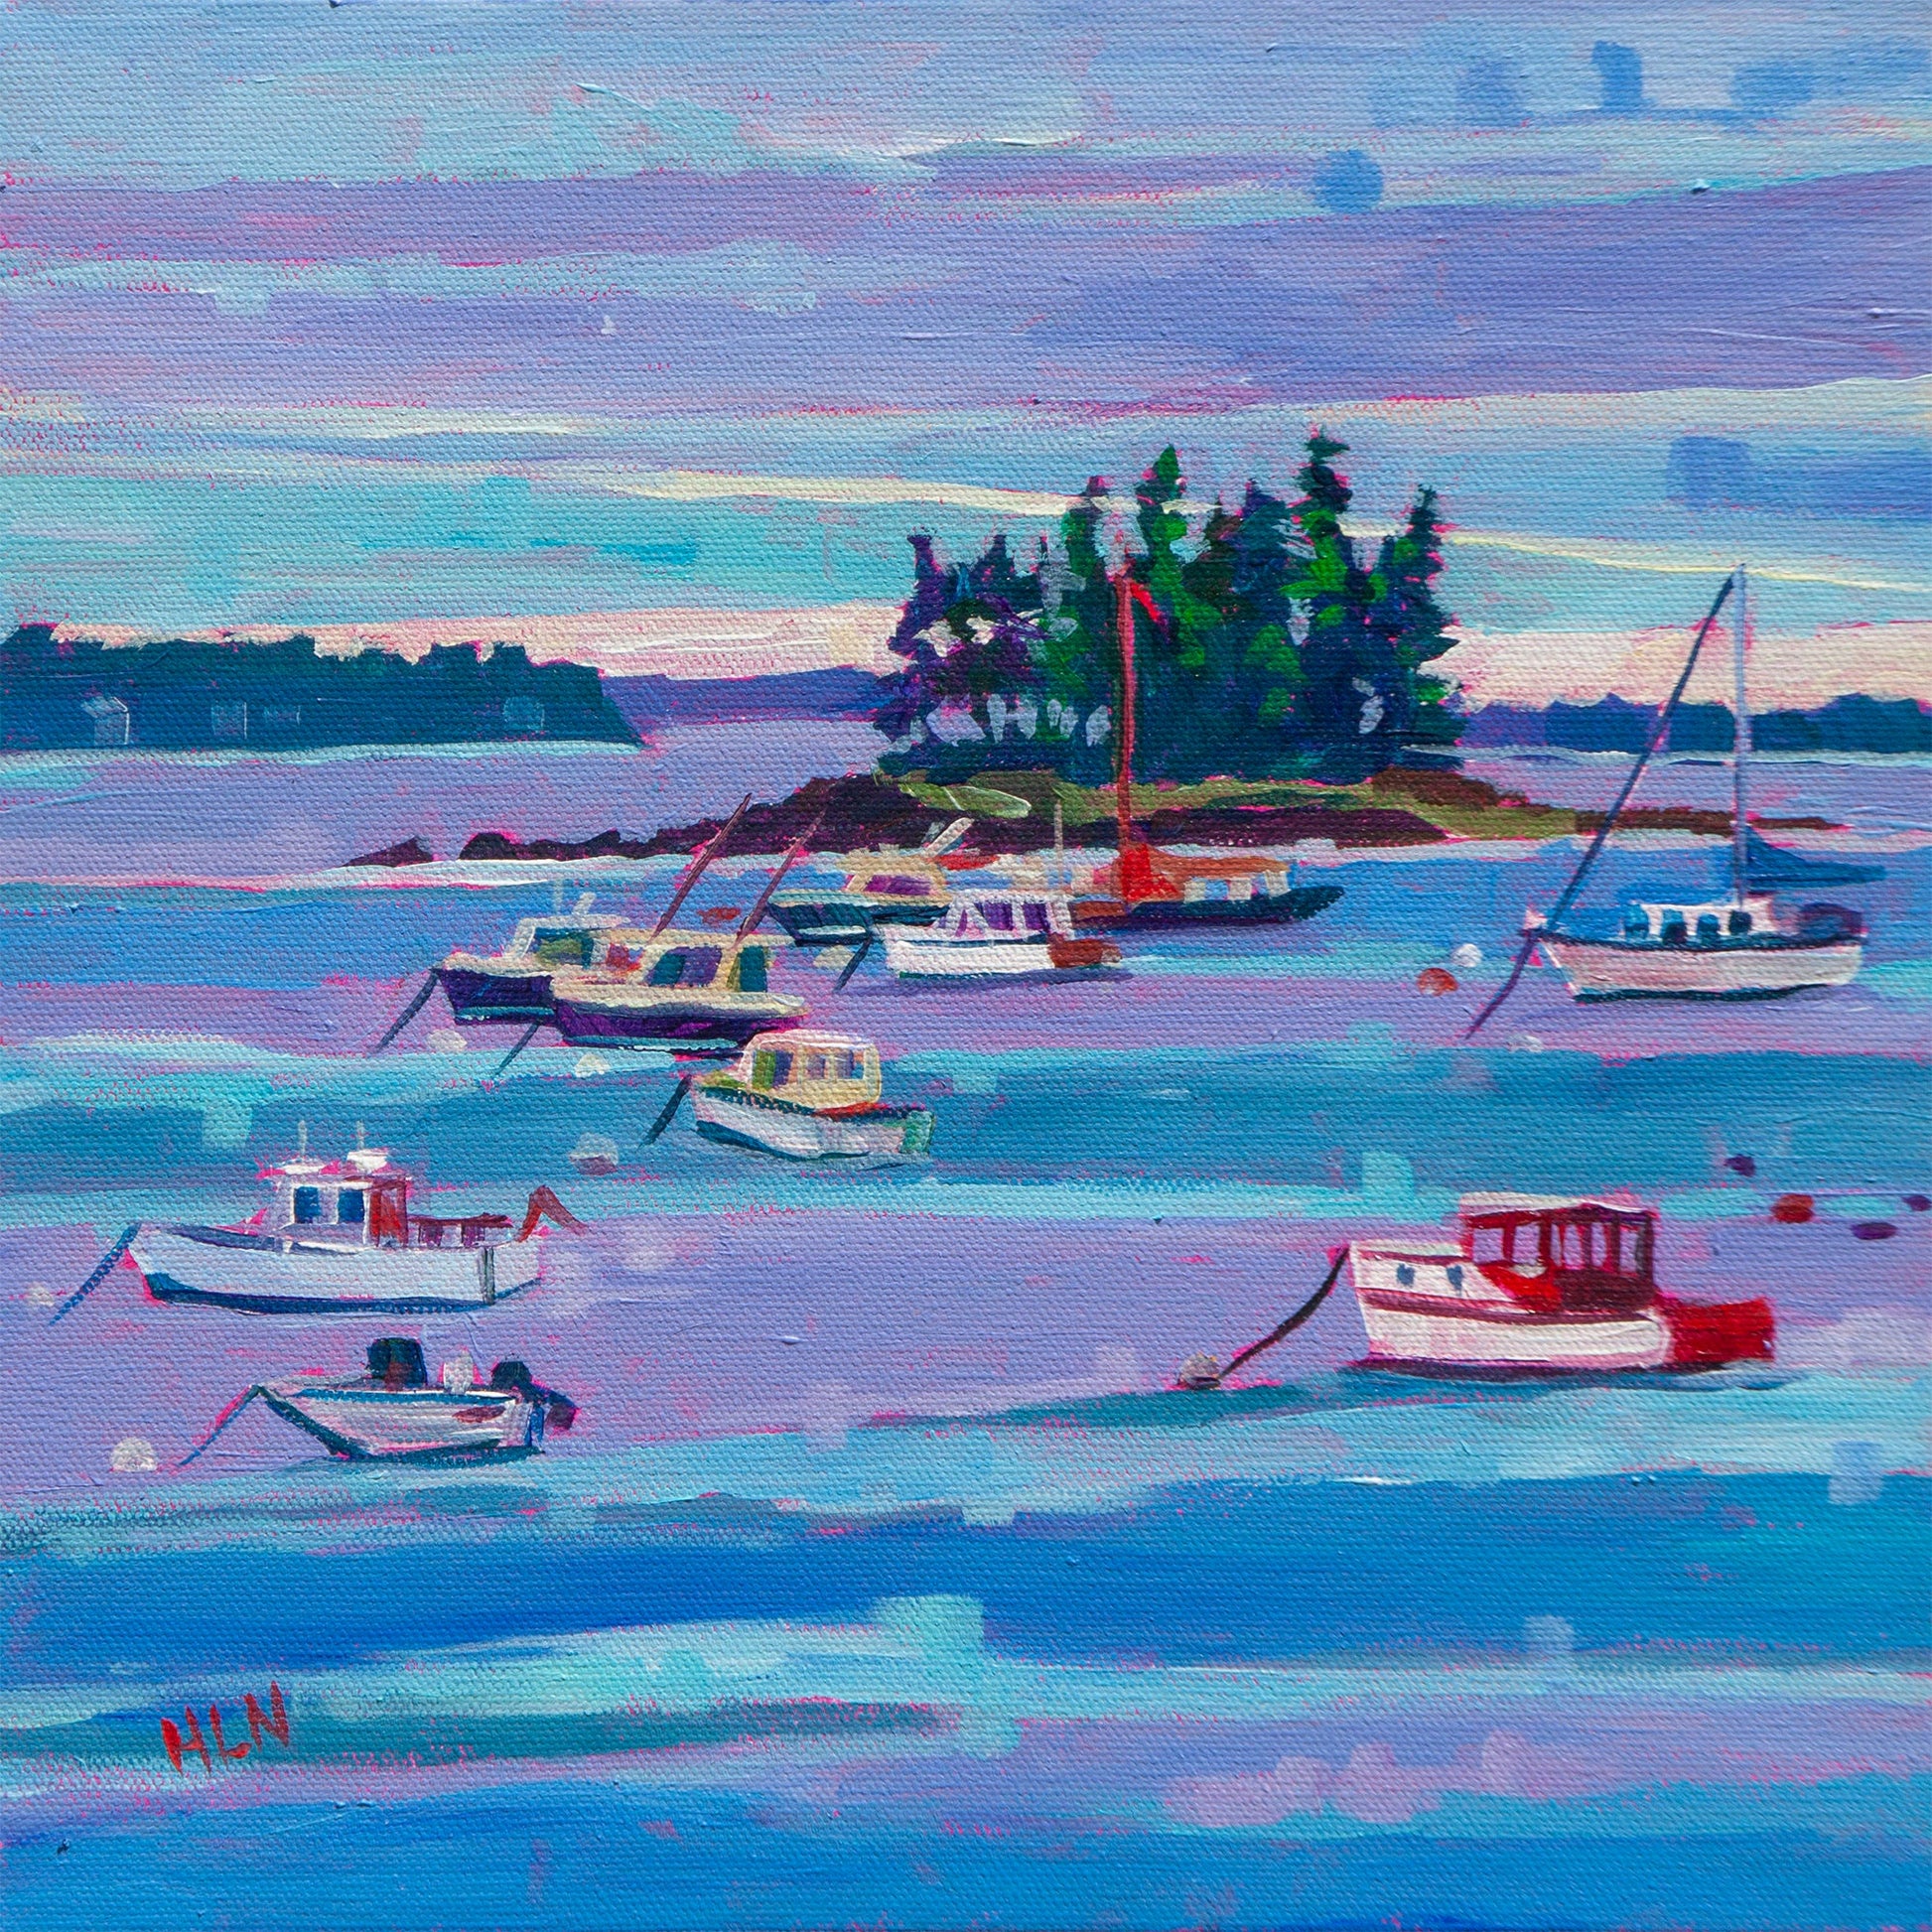 Lobster boats in the harbor around Mount Desert Island in Maine near Acadia National Park